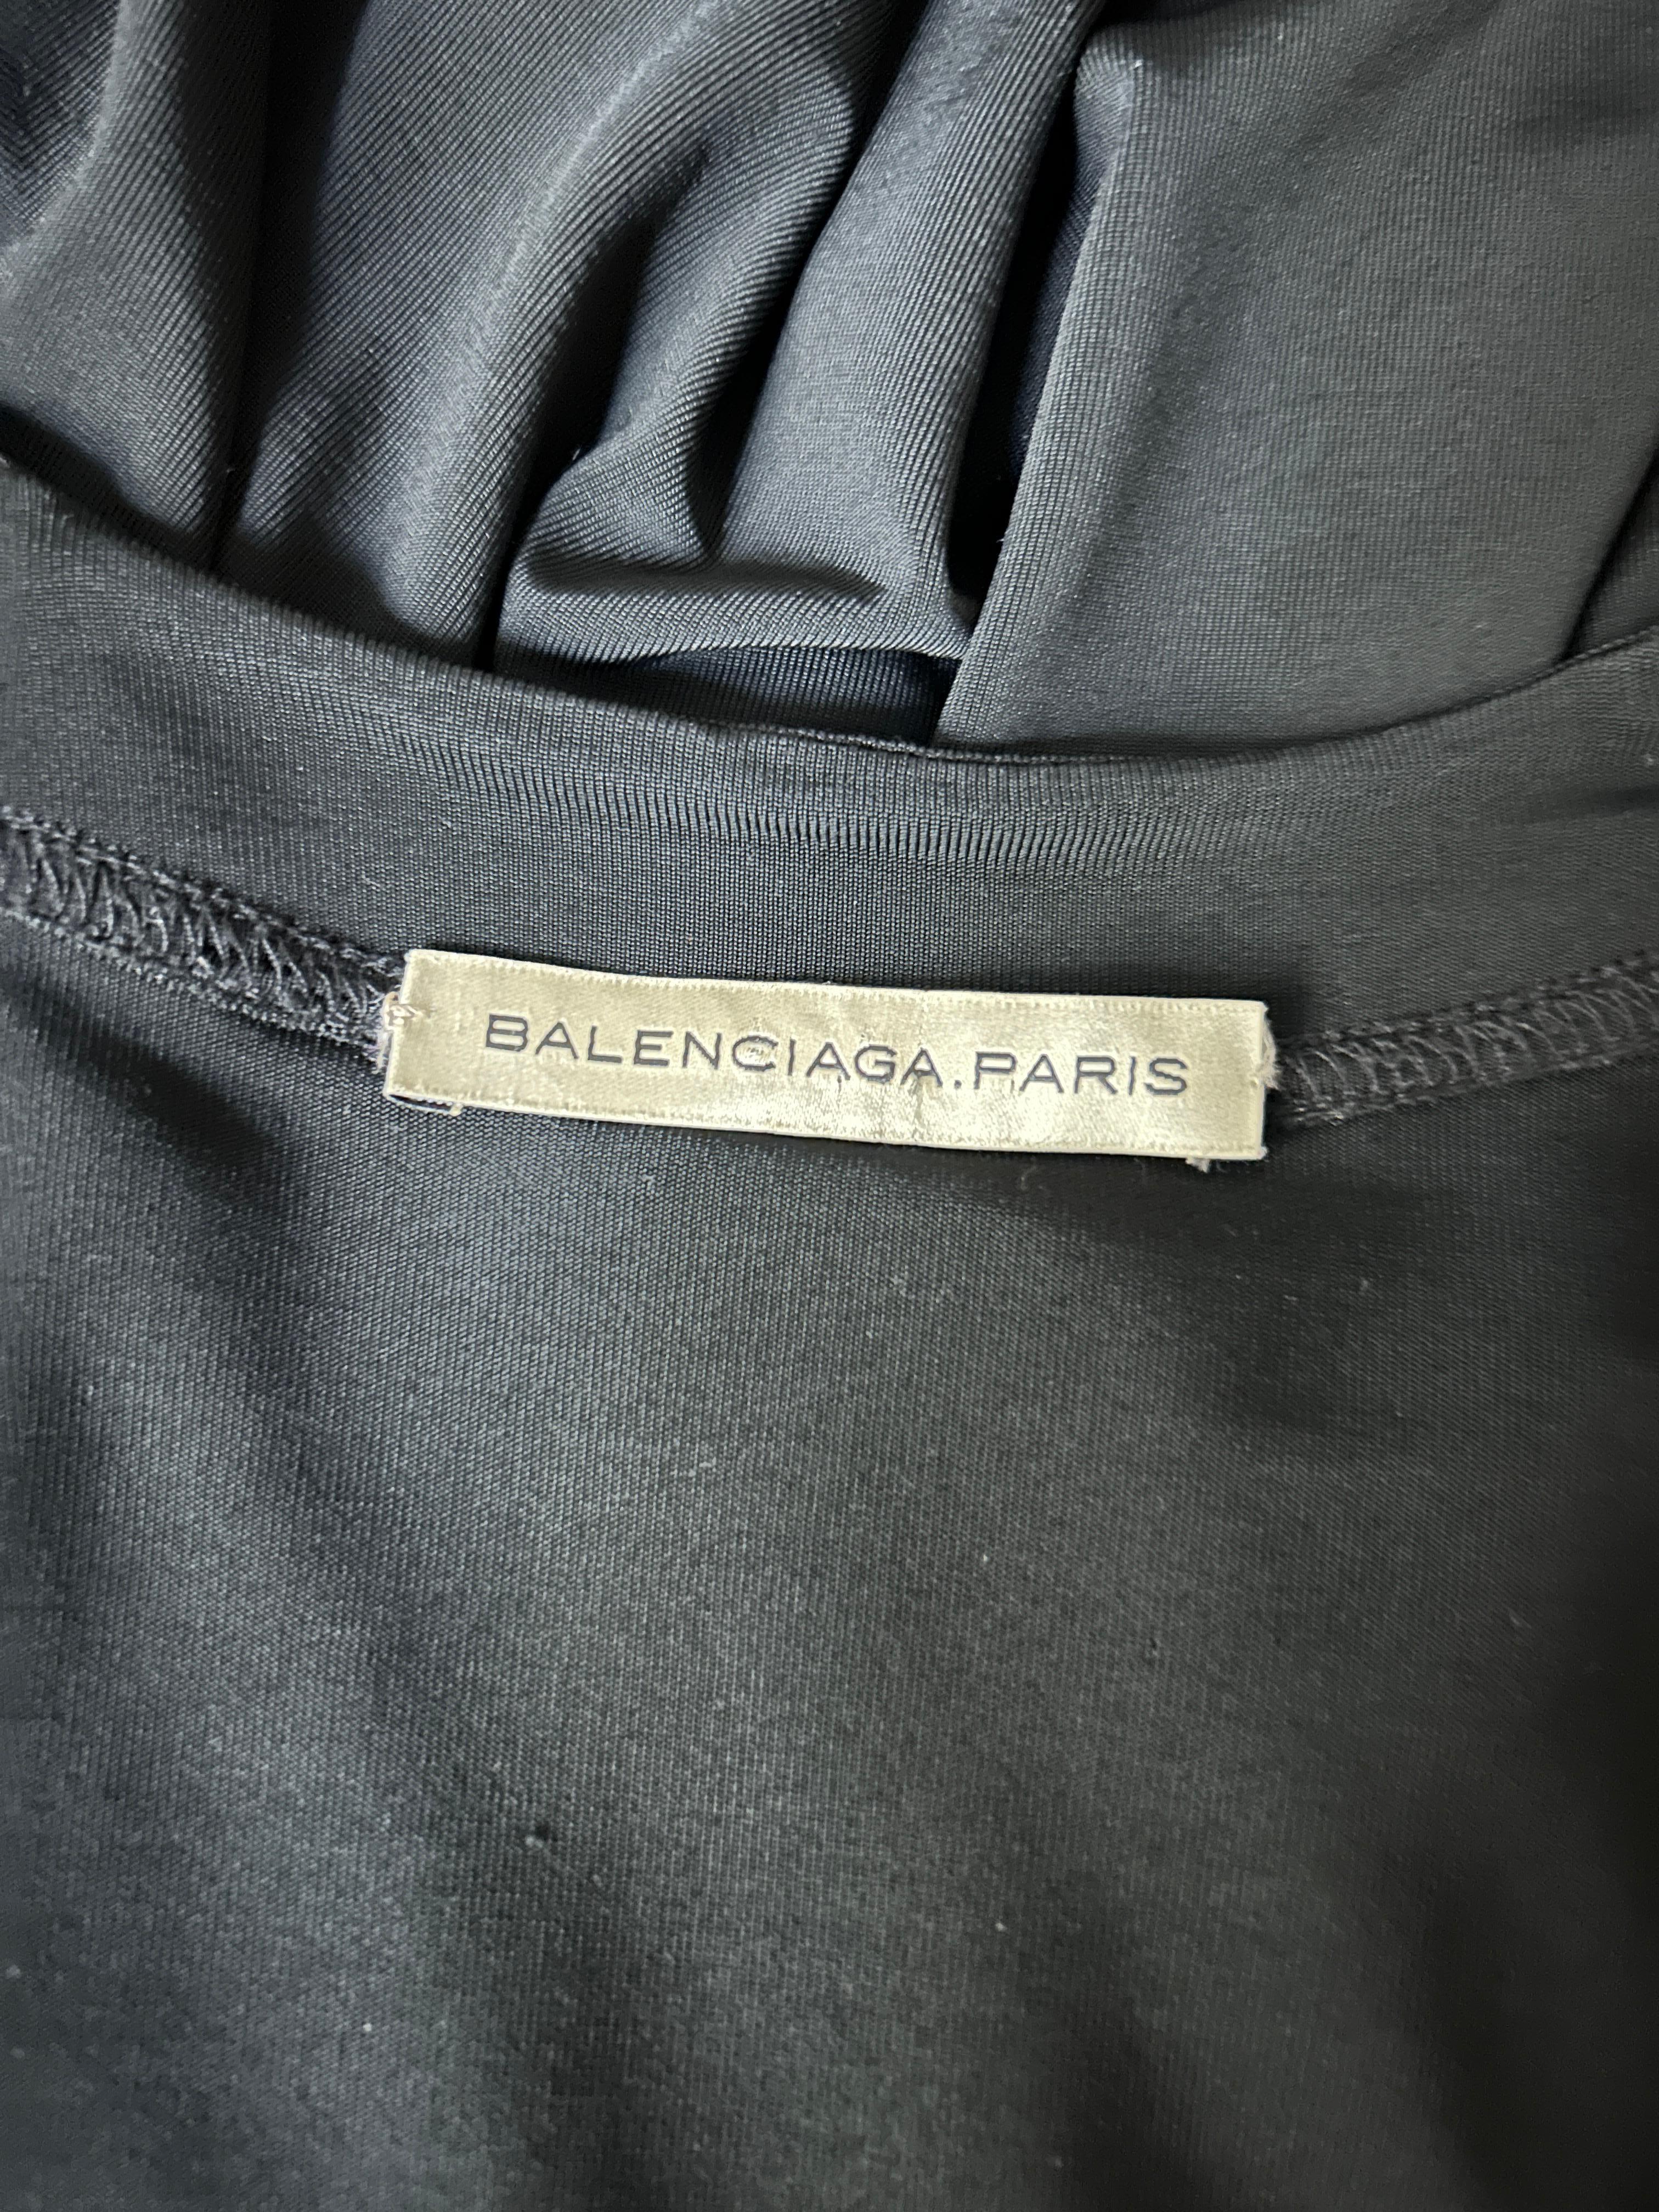 Balenciaga 2004 Ballet Warm Up Inspired Black Jersey Long Sleeve Faux Wrap Dress For Sale 2